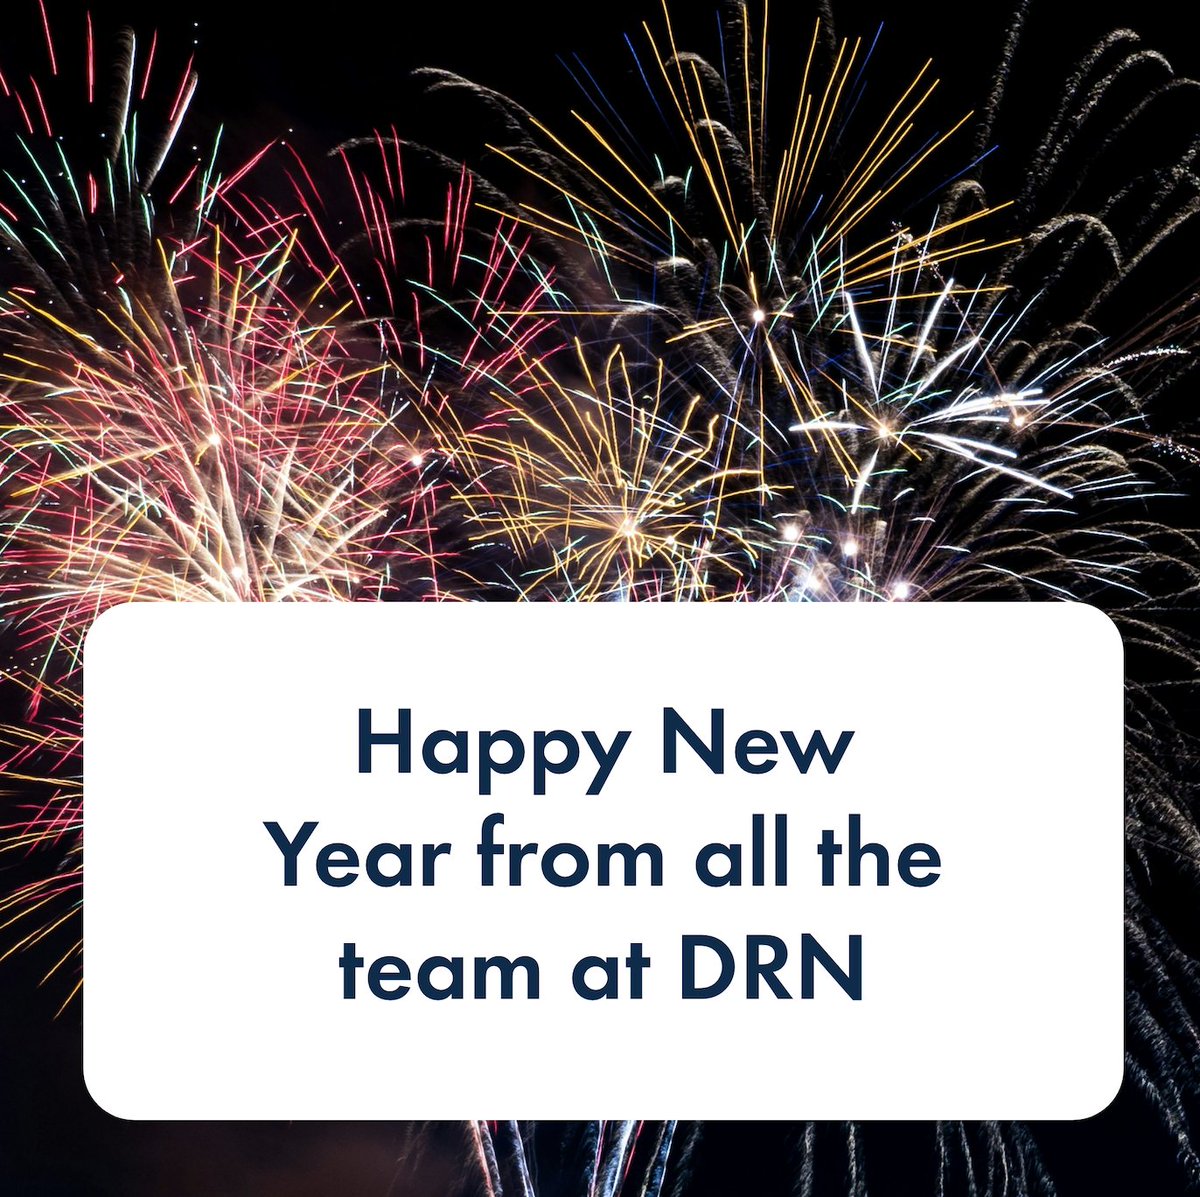 Happy New Year from the DRN team! 🎉 We look forward to continuing to provide you with expert, straightforward legal advice in 2024. #happynewyear